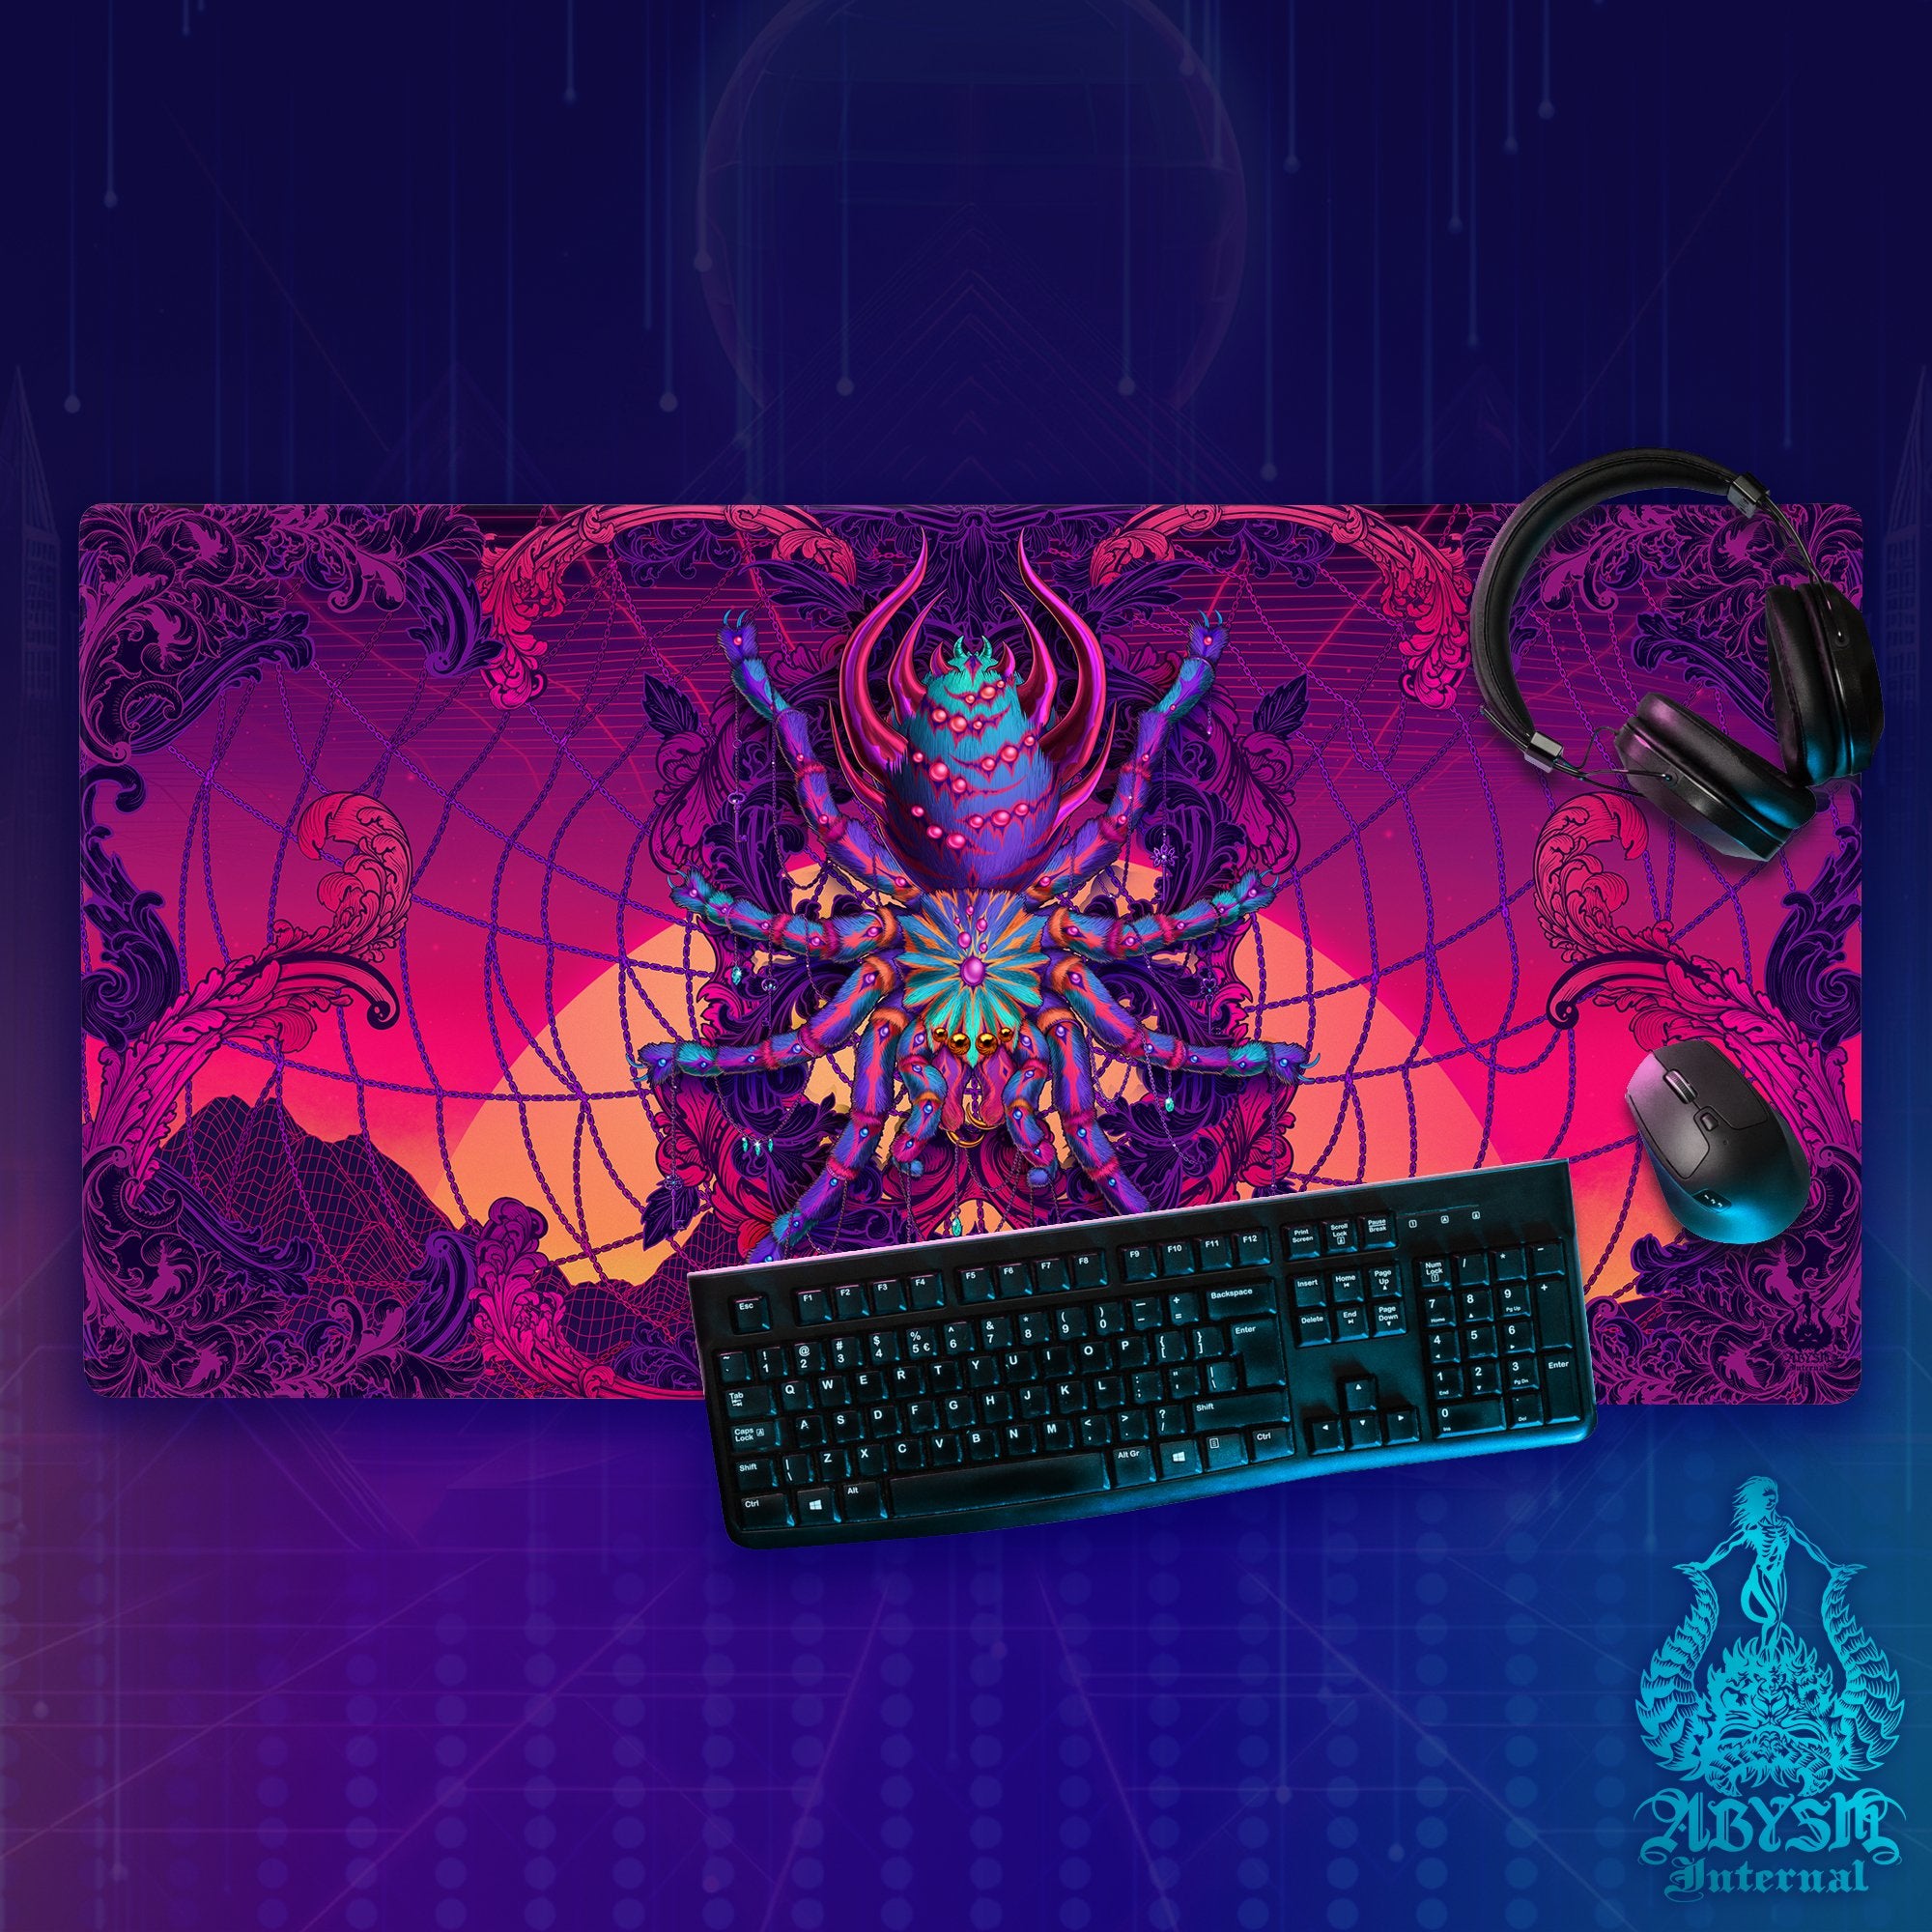 Trippy Gaming Mouse Pad, Psychedelic Desk Mat, Gamer Table Protector Cover, Workpad, Vaporwave Tarantula Art Print - Abysm Internal